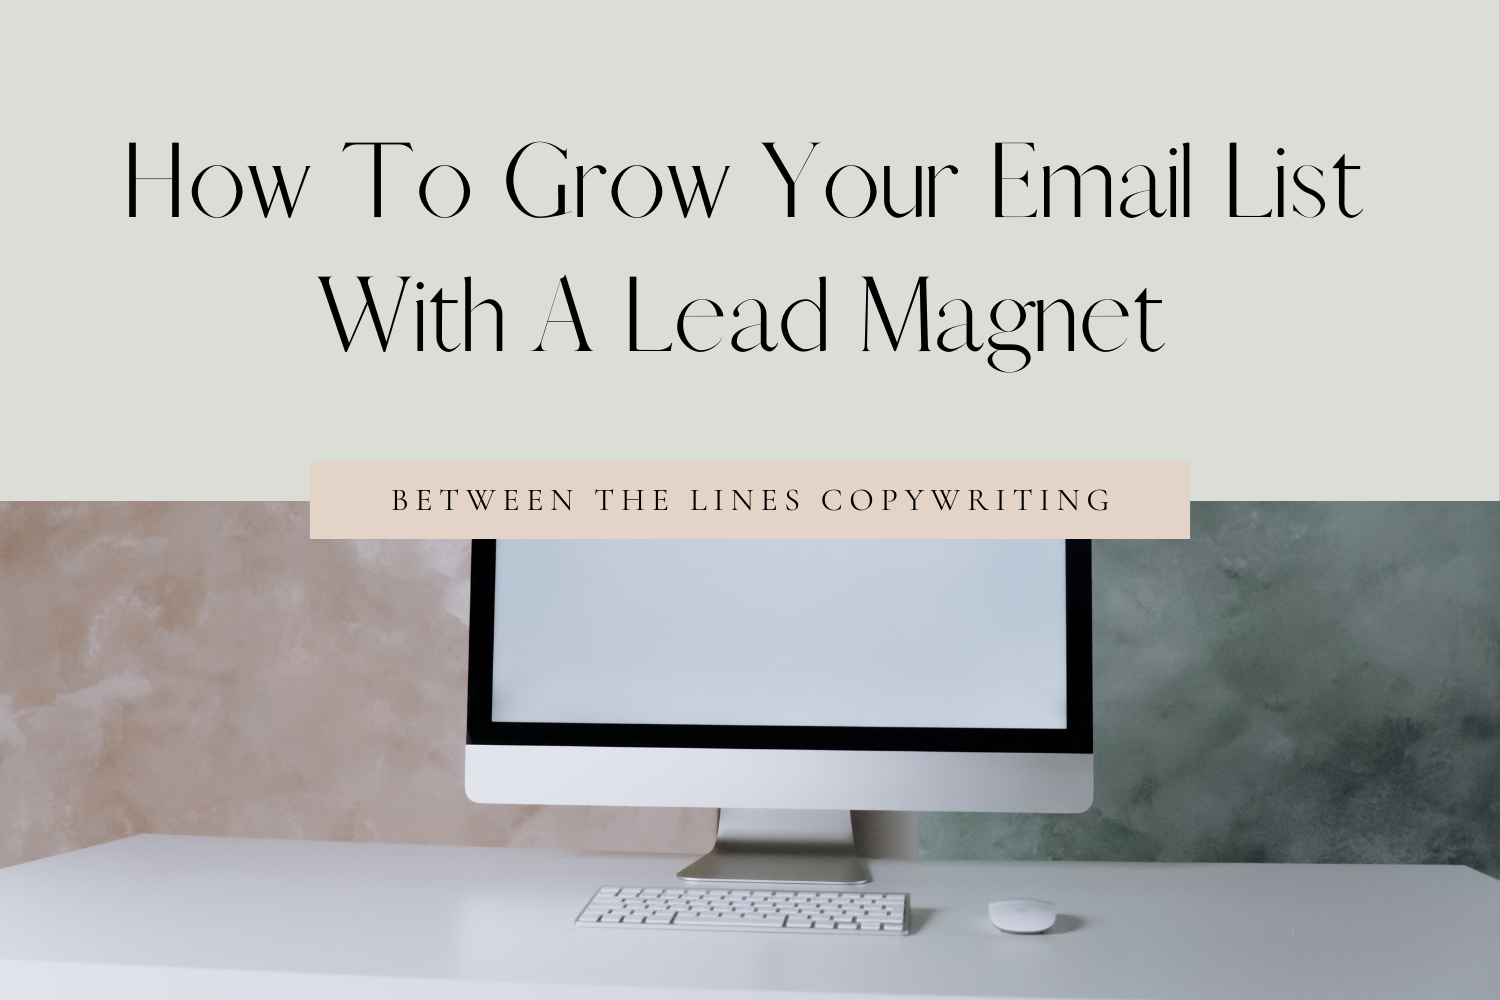 How To Grow Your Email List With A Lead Magnet